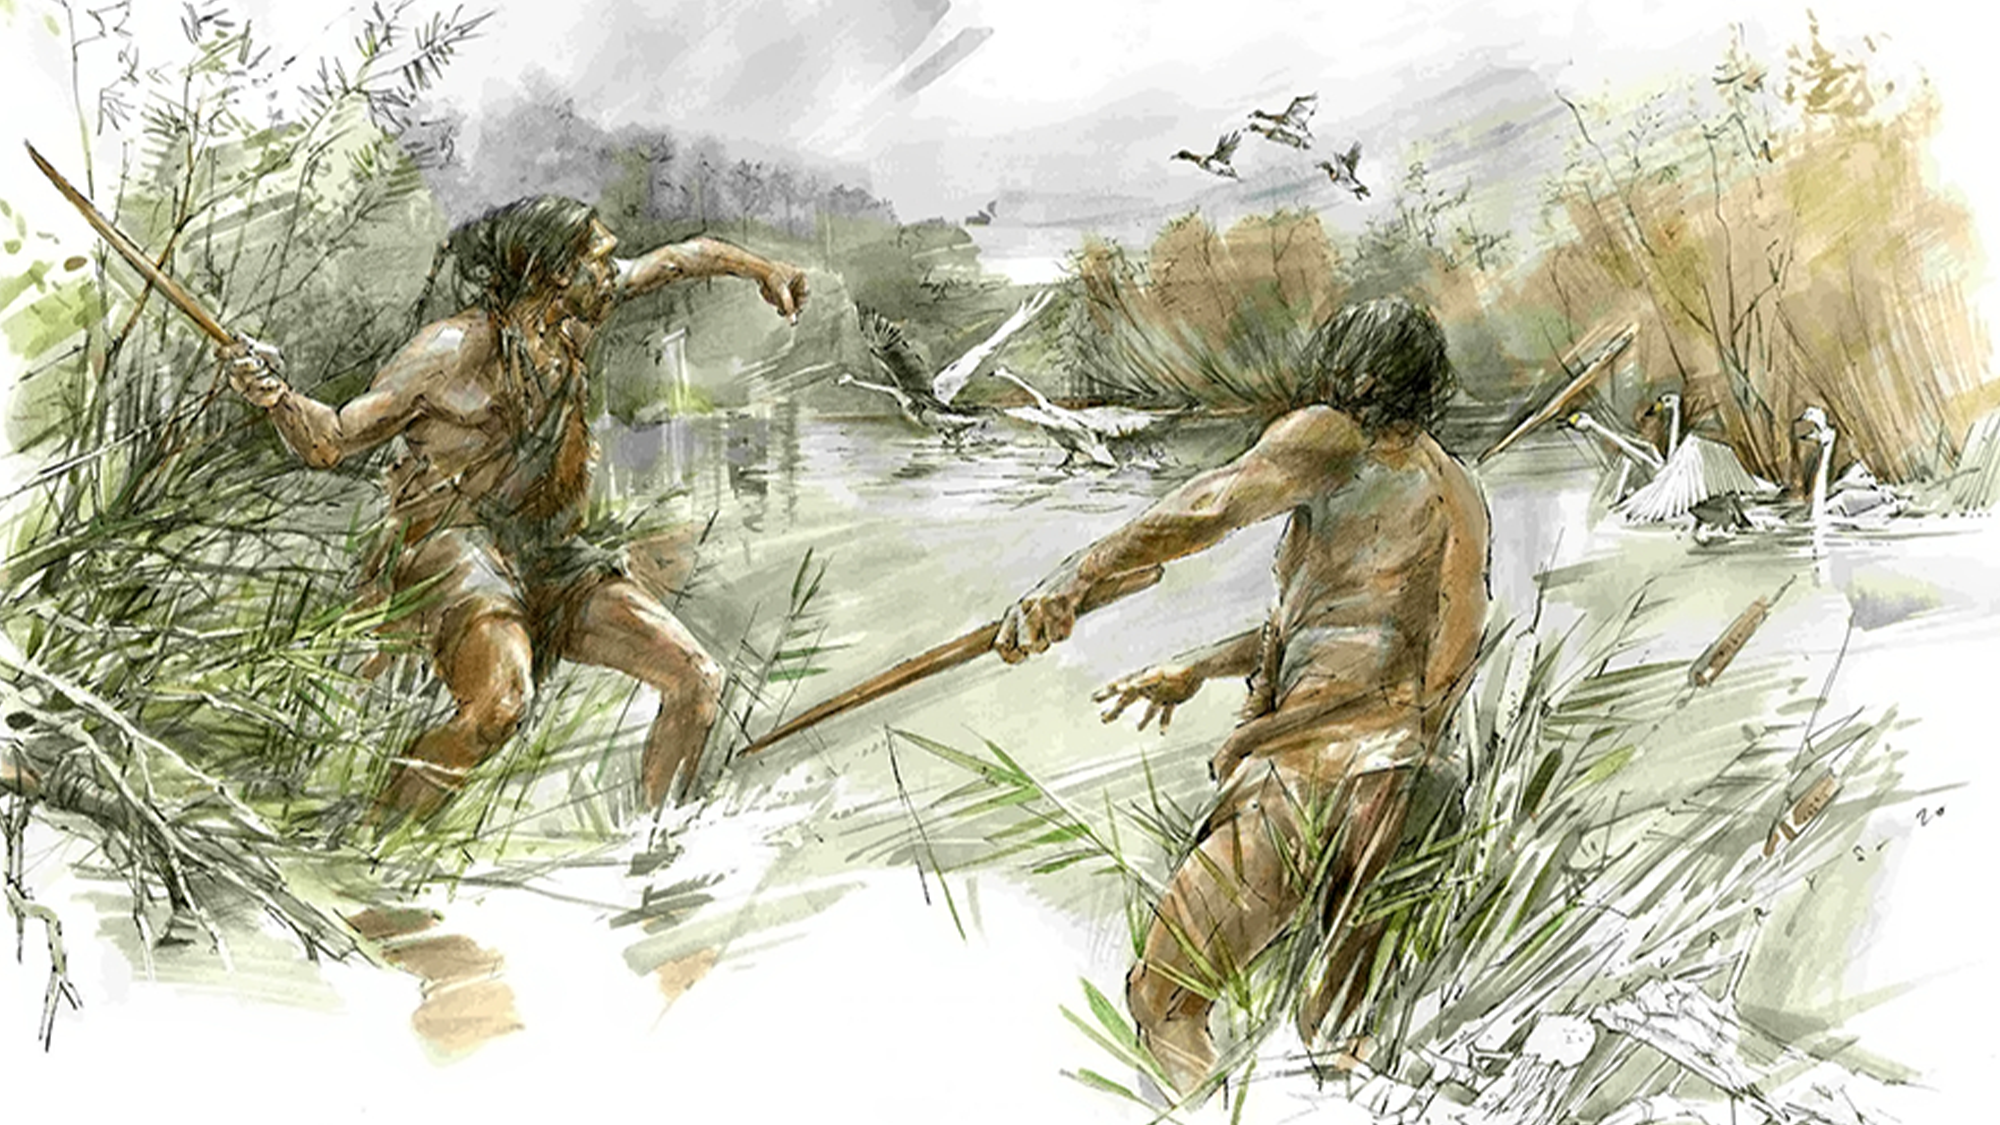 A javelin-like stick shows early humans may have been keen woodworkers